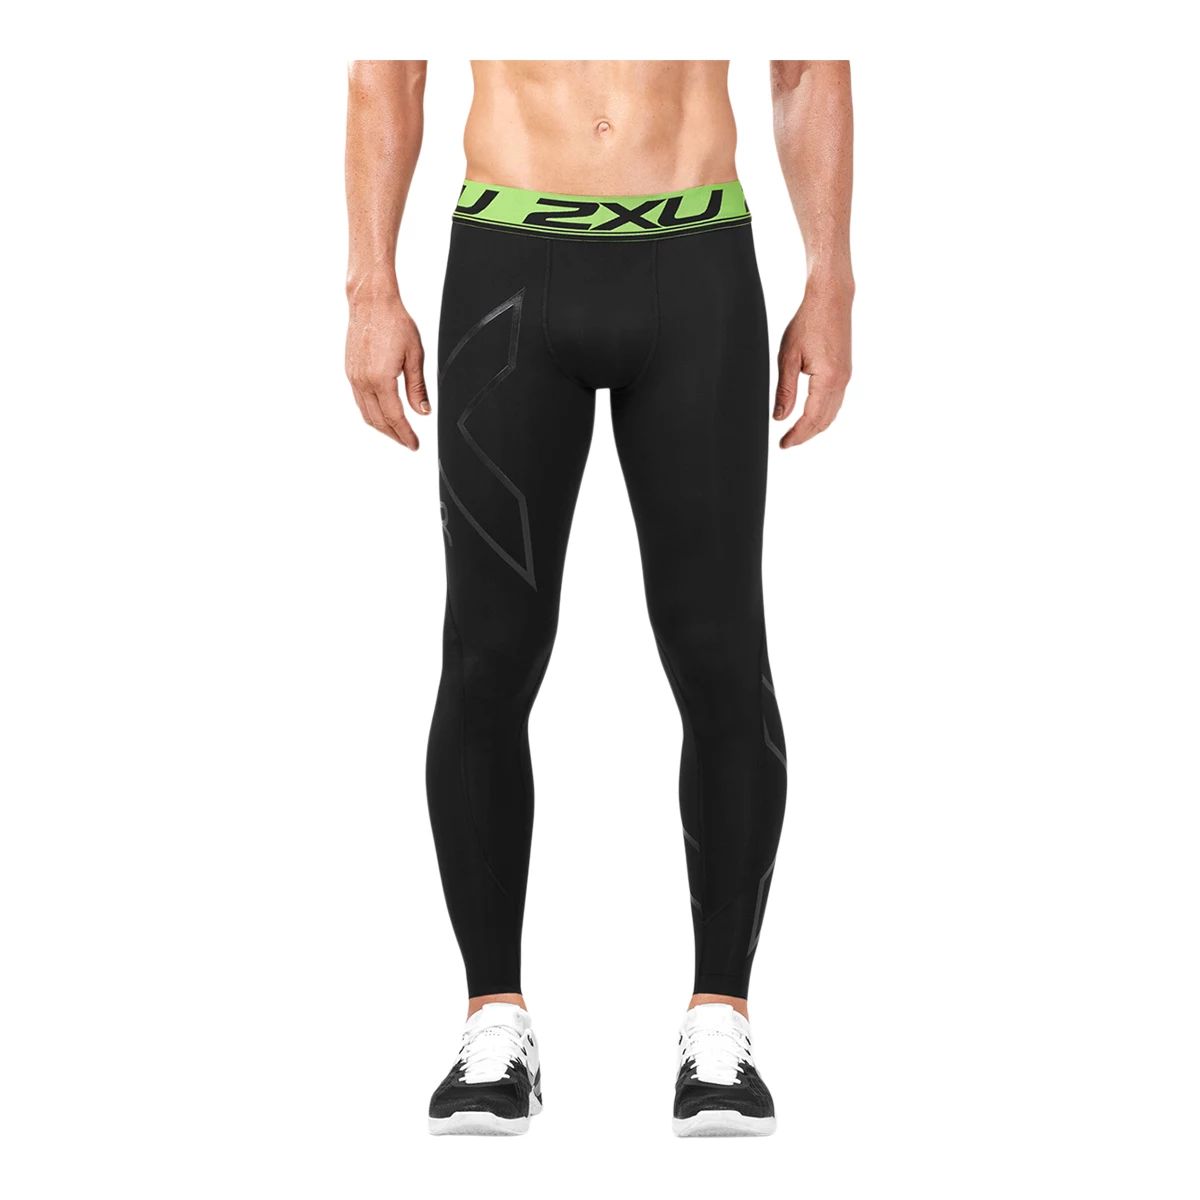 Up To 63% Off on 2 Pack Mens Compression Pants